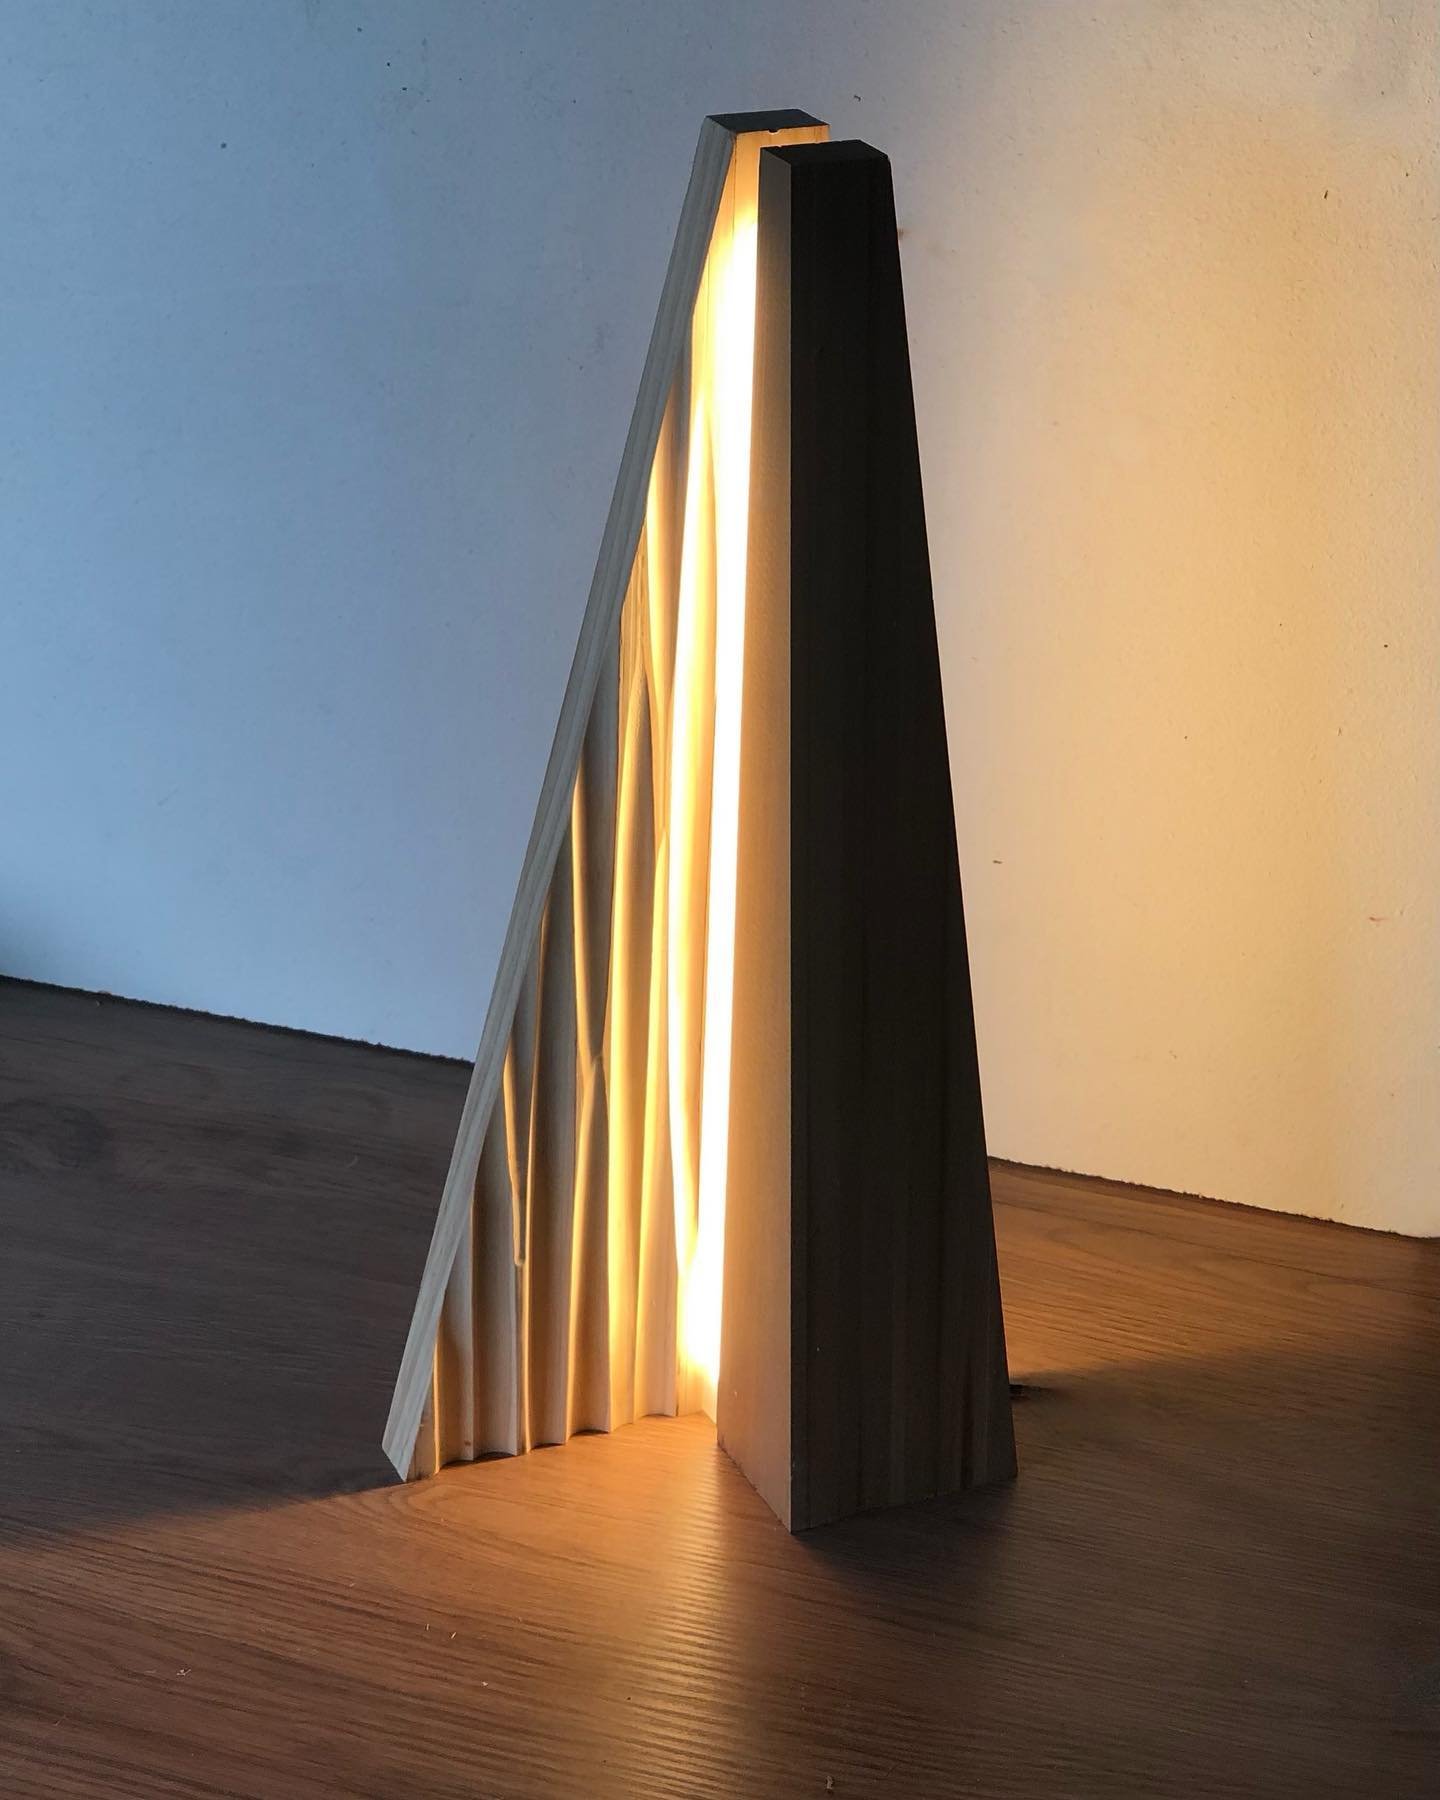 Prototype table lamp.

Experimenting with highlighting a textured terrain-like surface and bouncing backlight off walls. 

#prototype #tablelamp #interior #castlightingnz